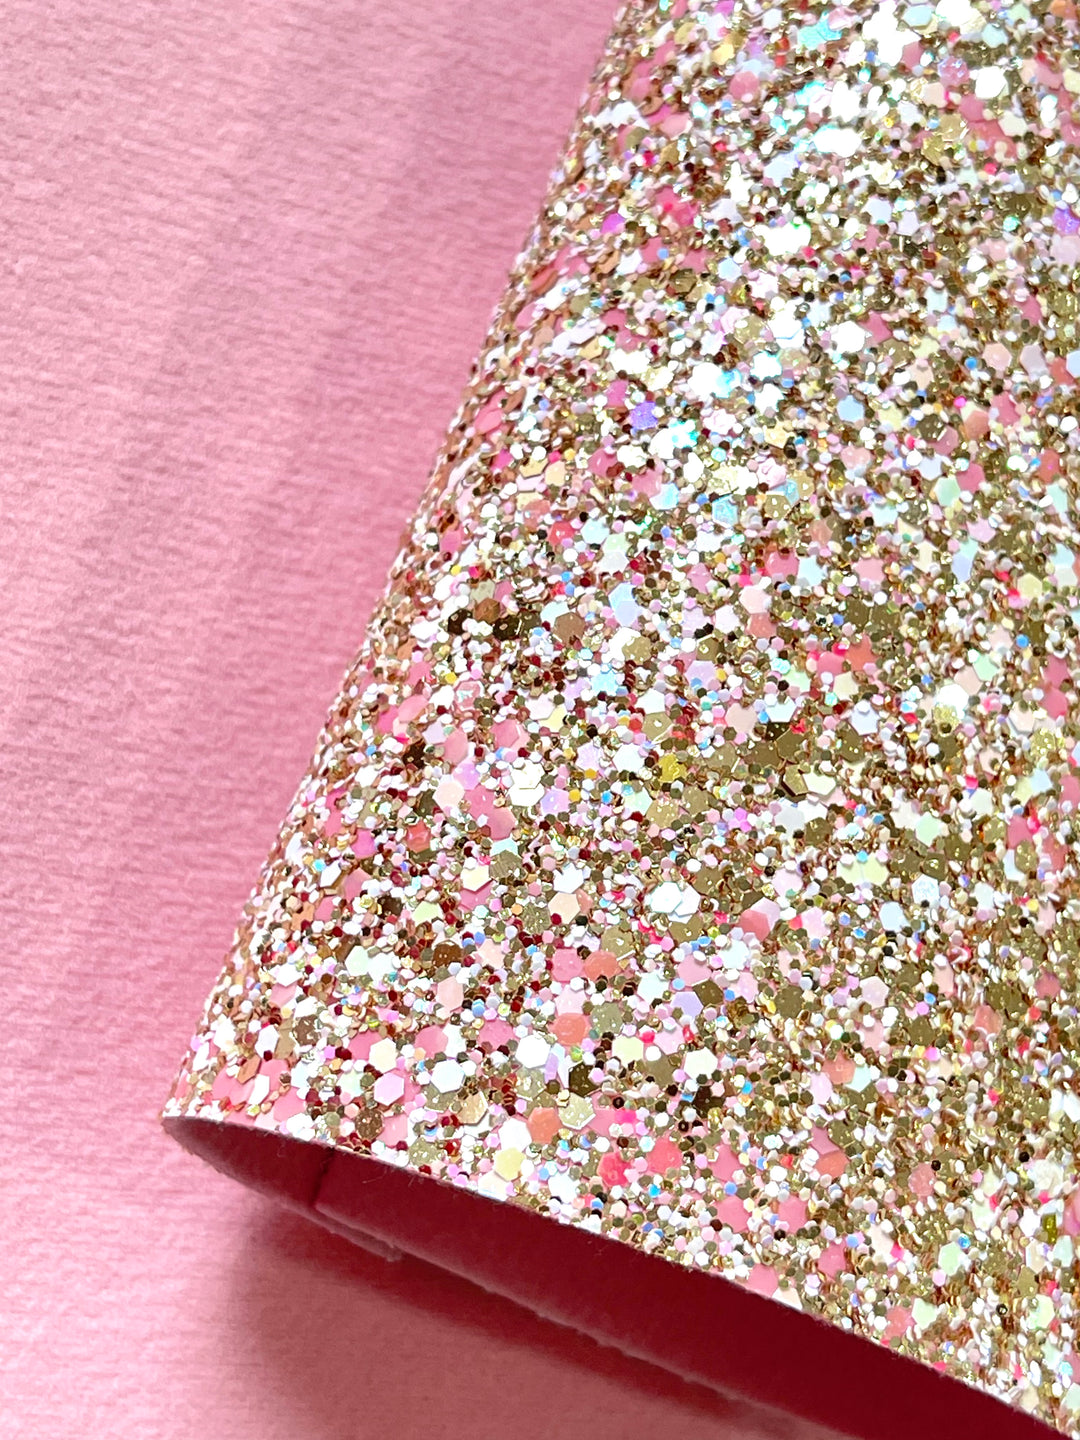 Glamour Sparkle Chunky Glitter Leather | Mixed Pink White & Gold Glitter Leather with a Pink Felt Rear